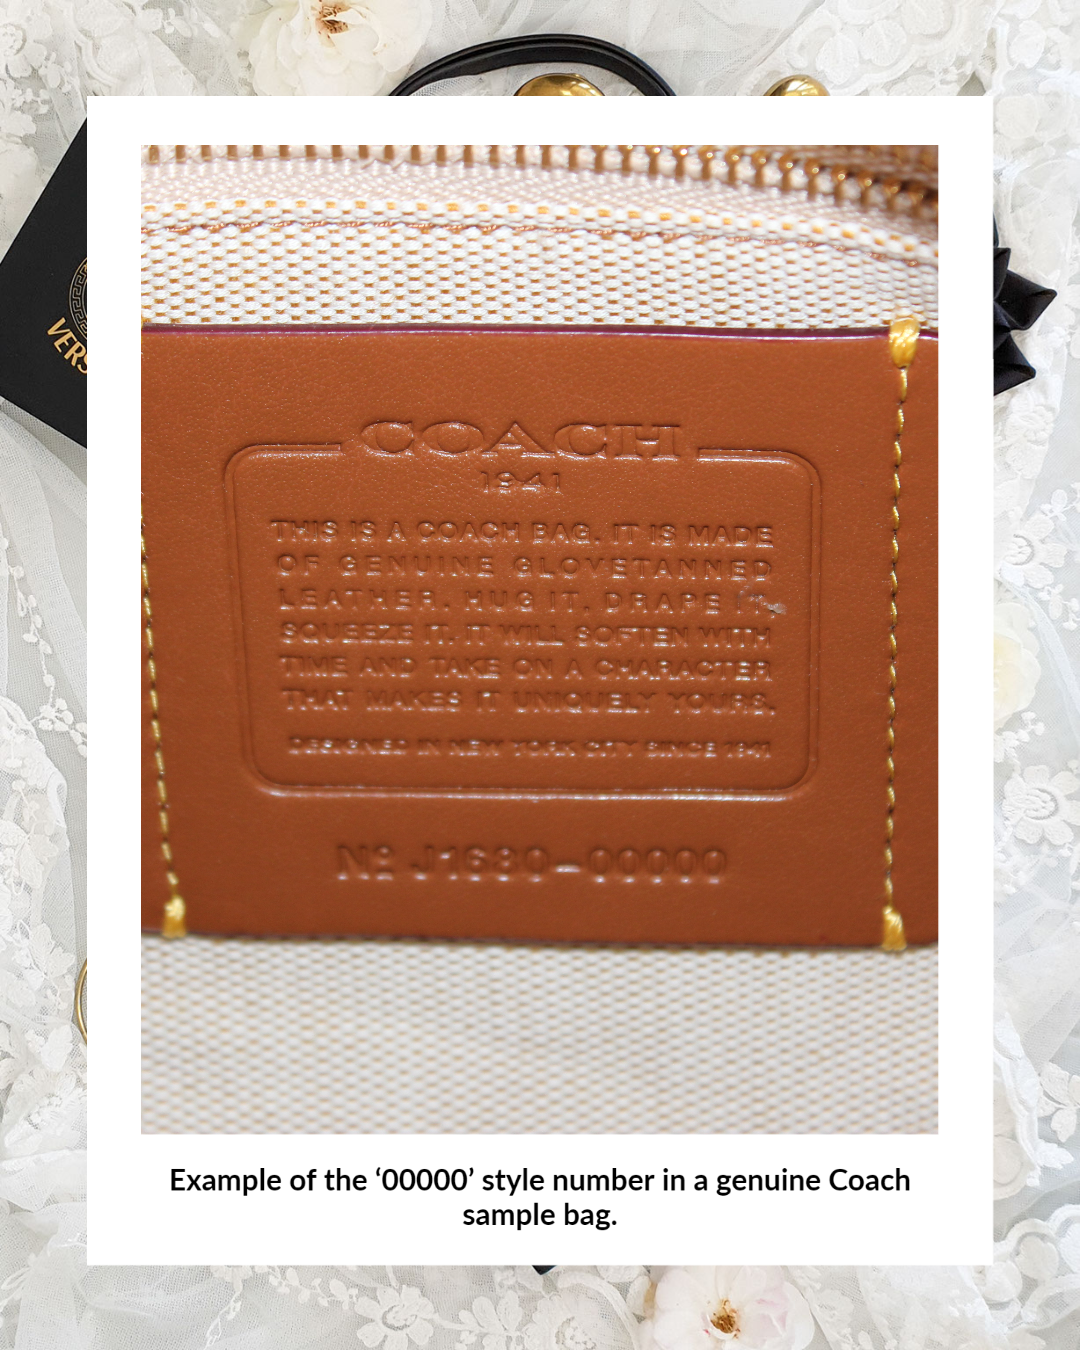 The Ultimate Guide to Coach Serial Numbers - Coach Style Number